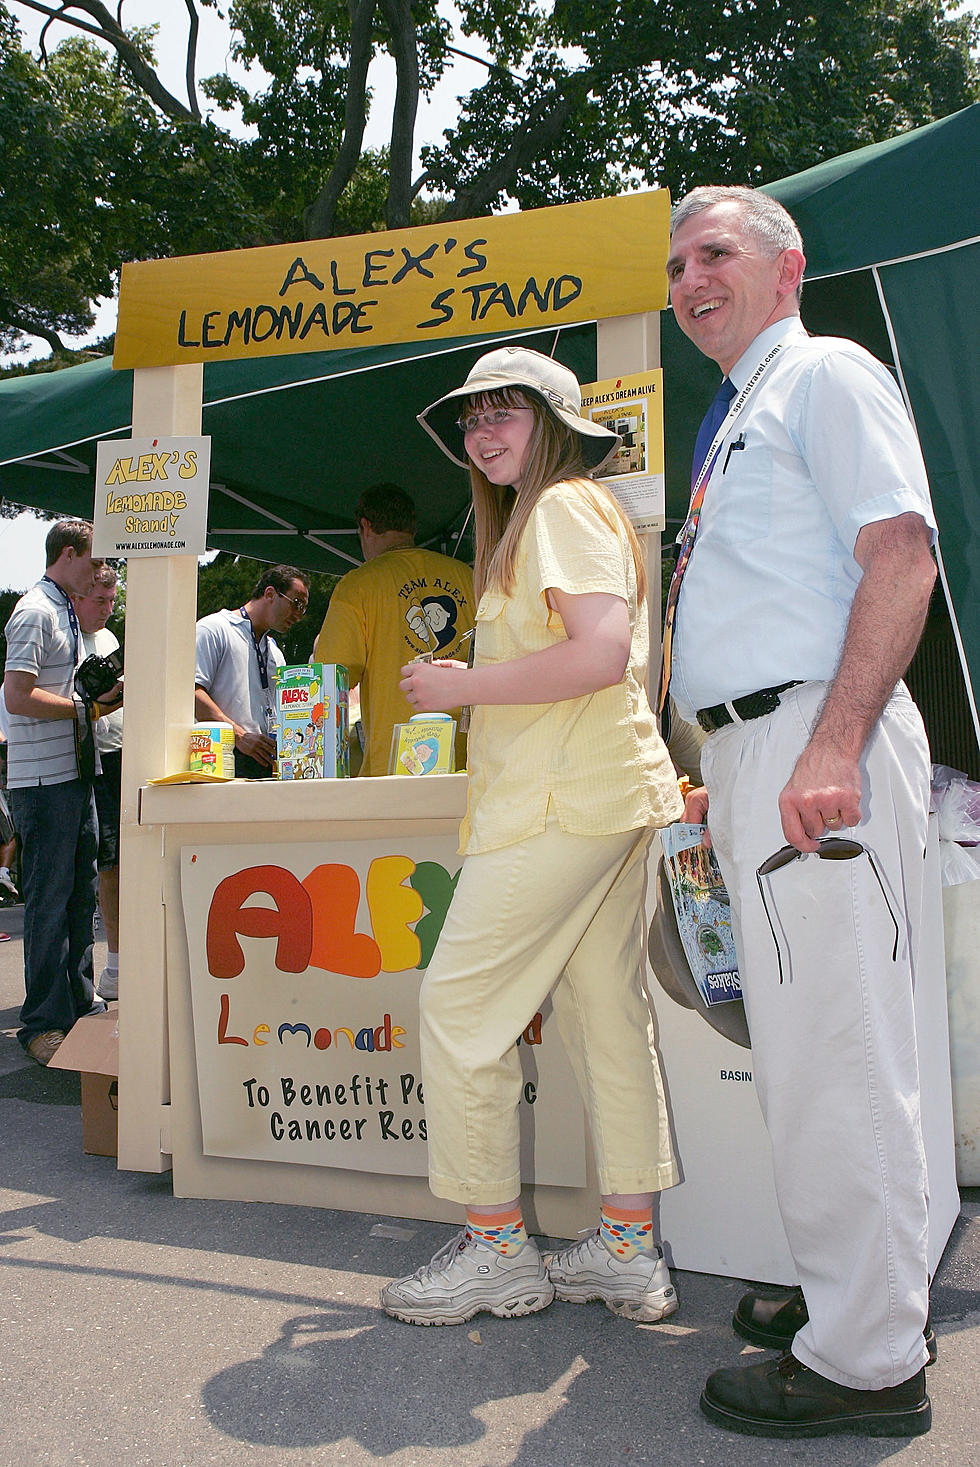 Illinois Lemonade Stands Protected Effective January 1st